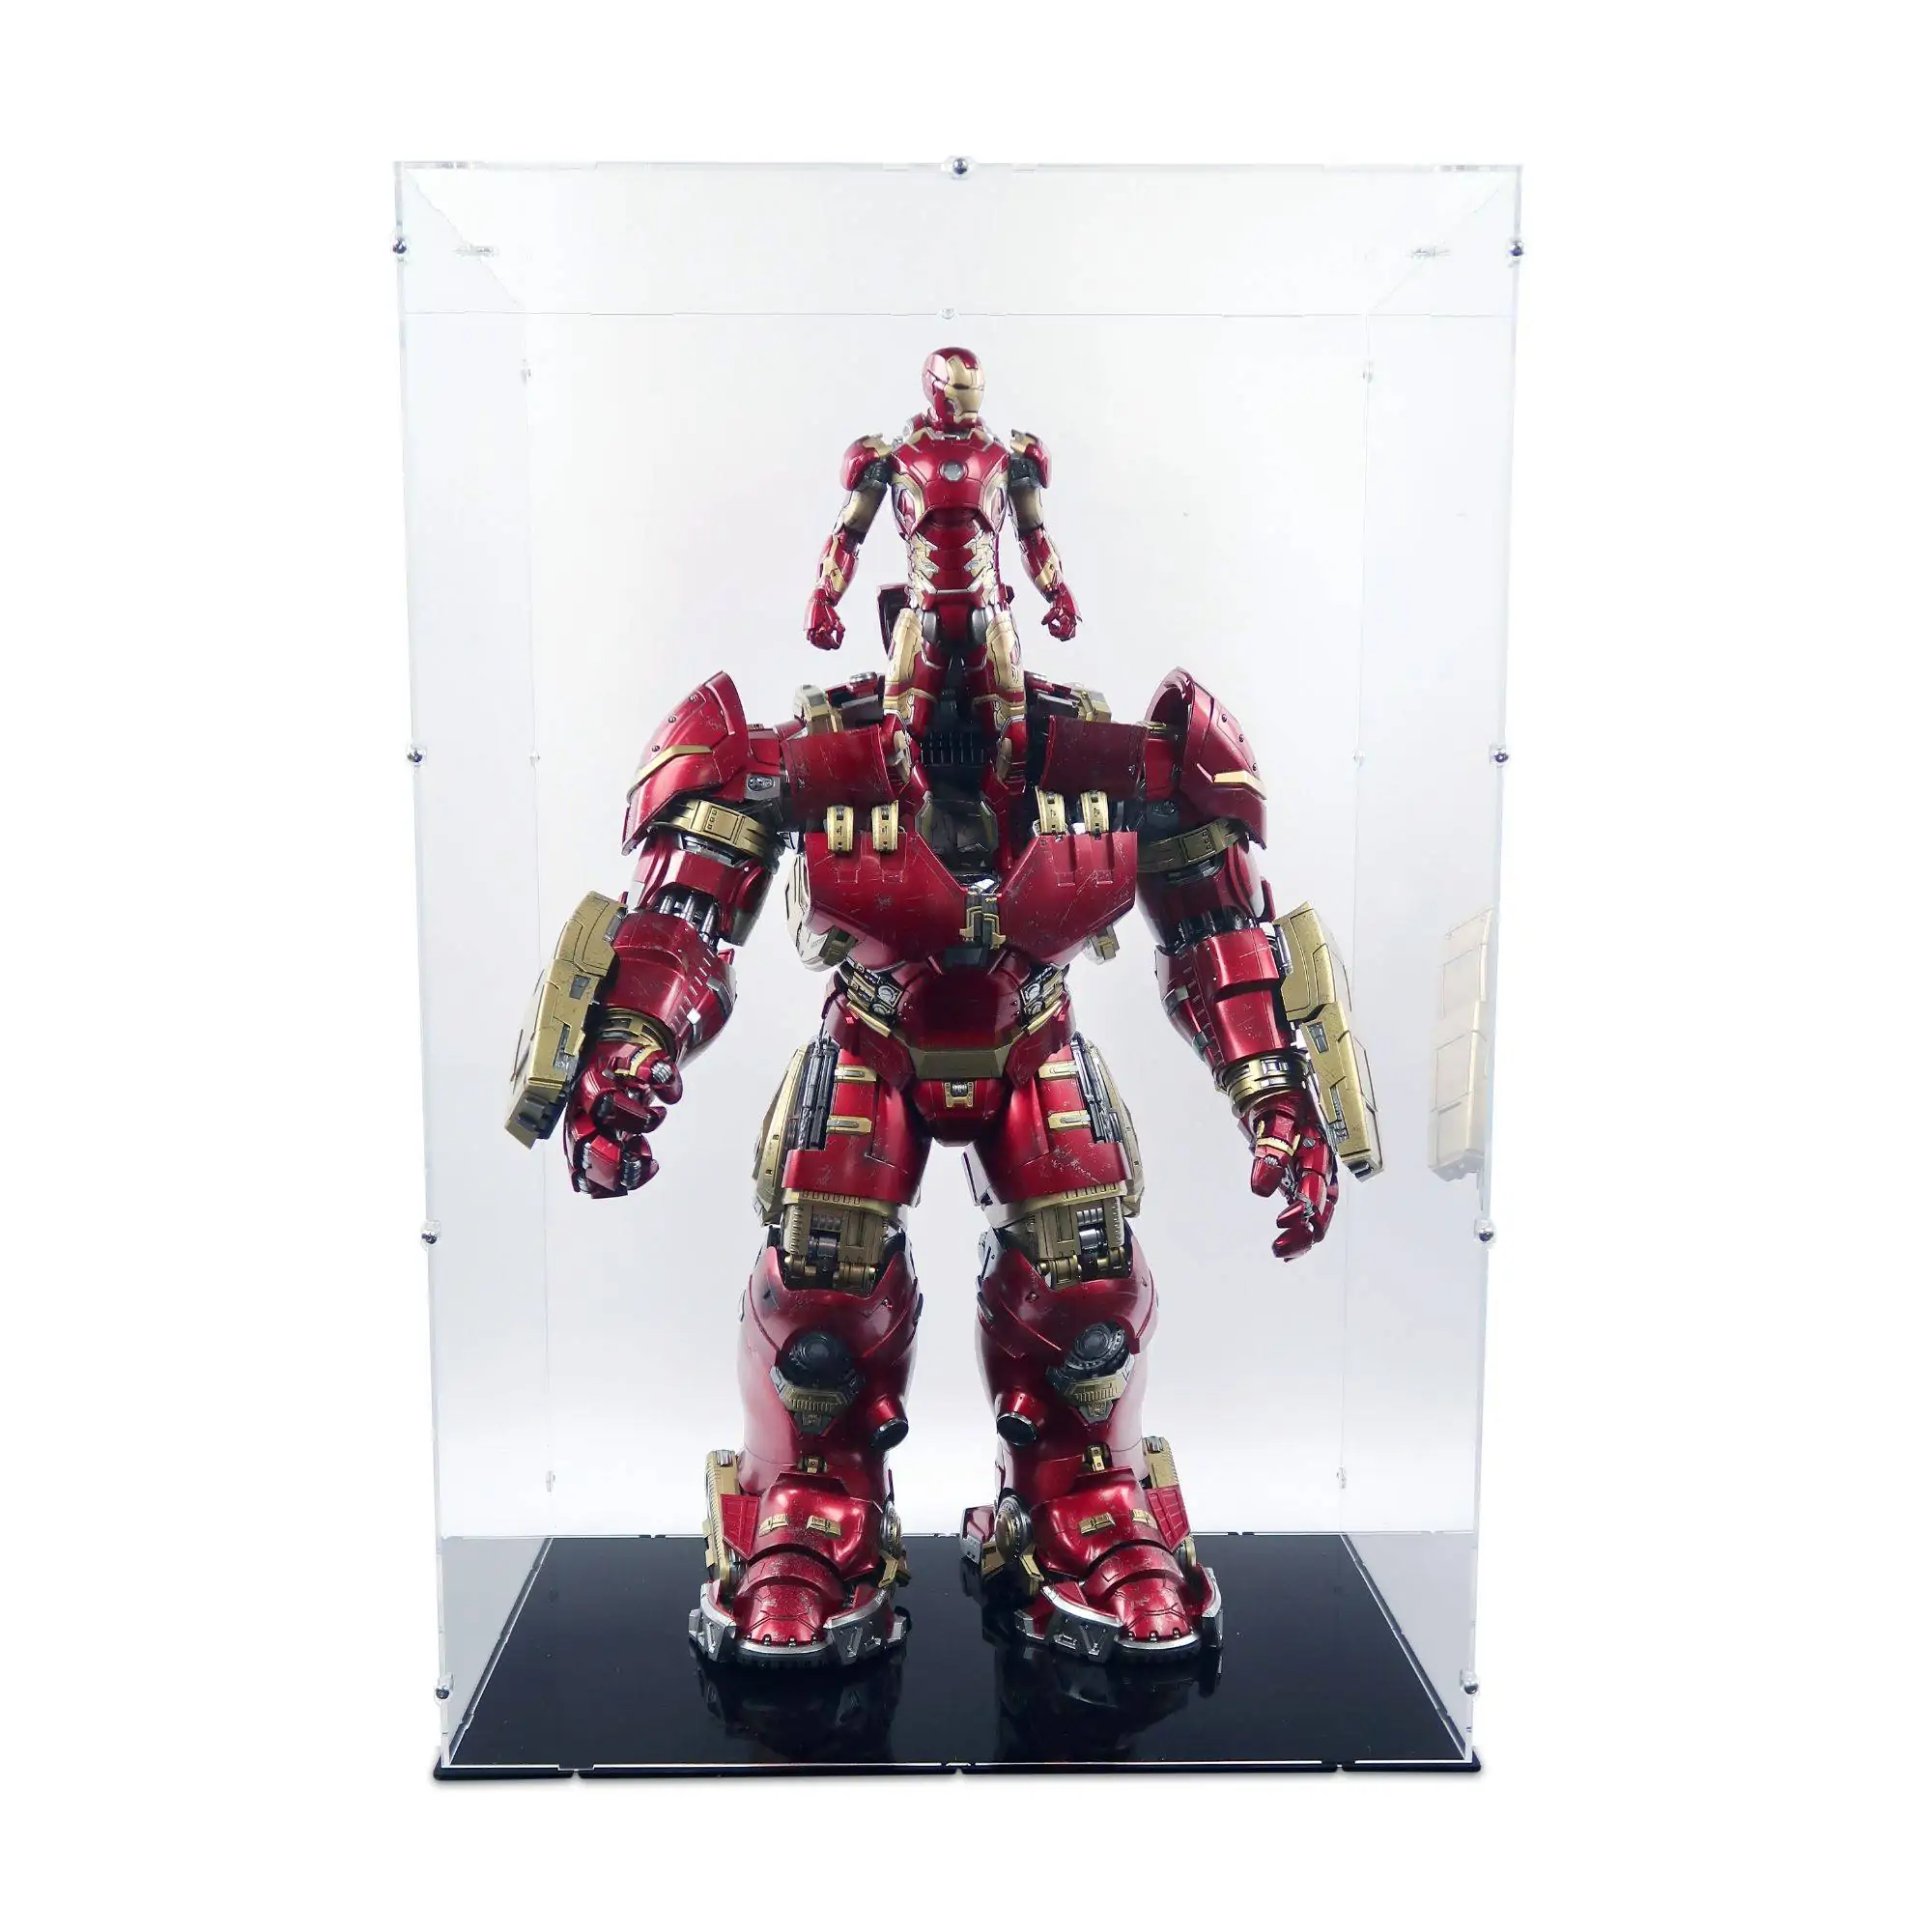 Inútil Doméstico Observar 1/6 Hot Toys Display Cases :: 1/6 Scale Hulkbuster & Iron Man (Deluxe)  Display Case for Hot Toys